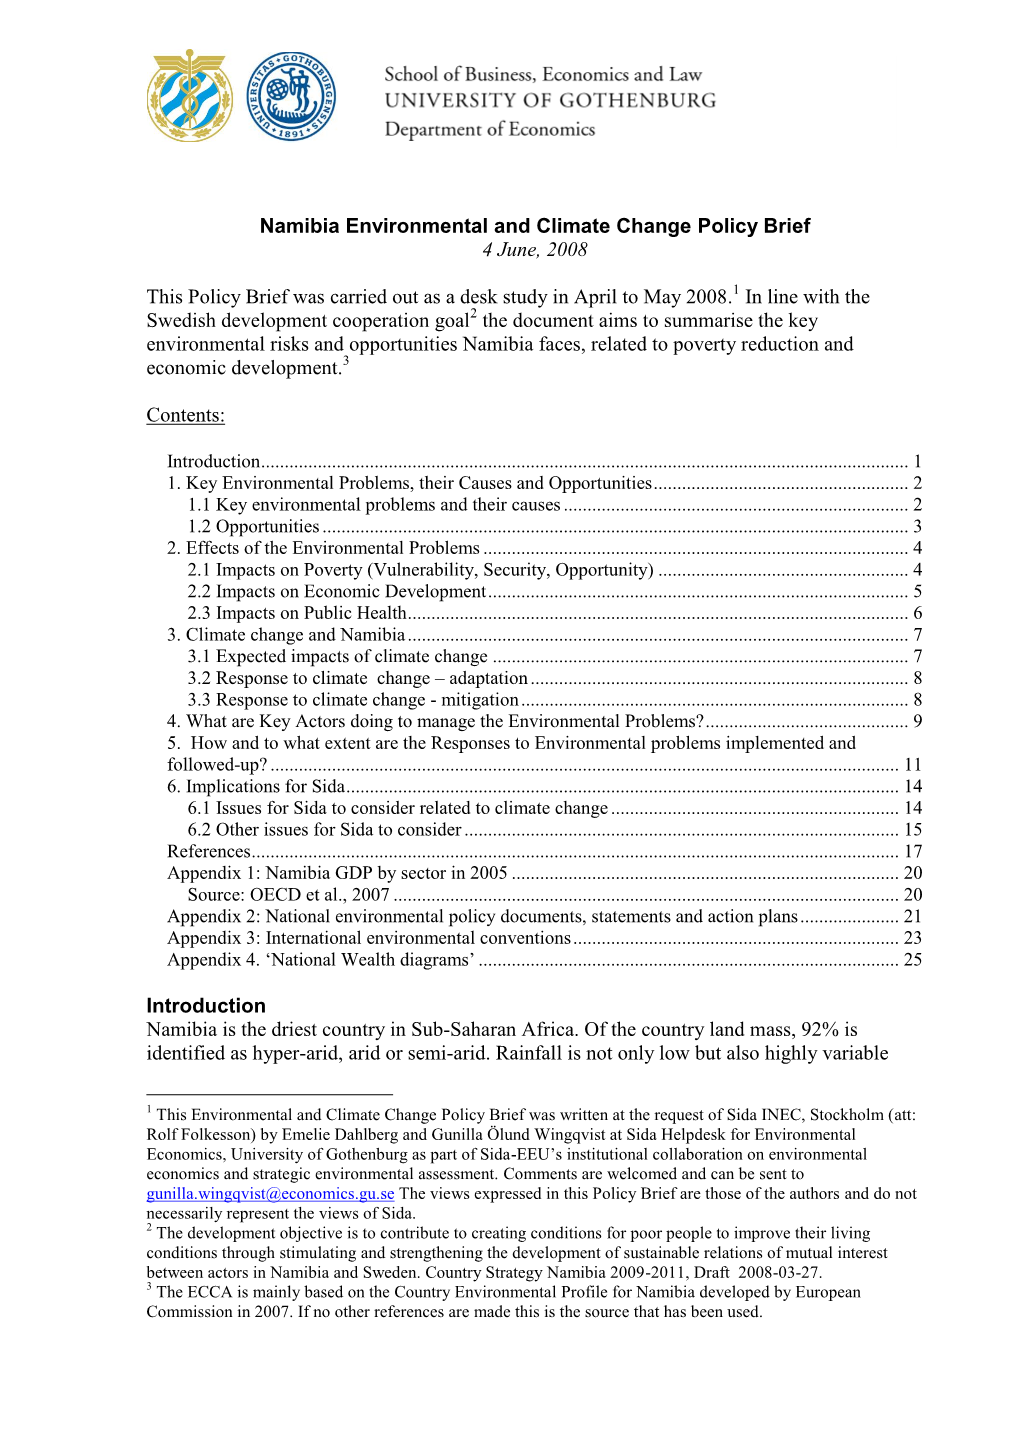 Namibia Environmental and Climate Change Policy Brief (2008)